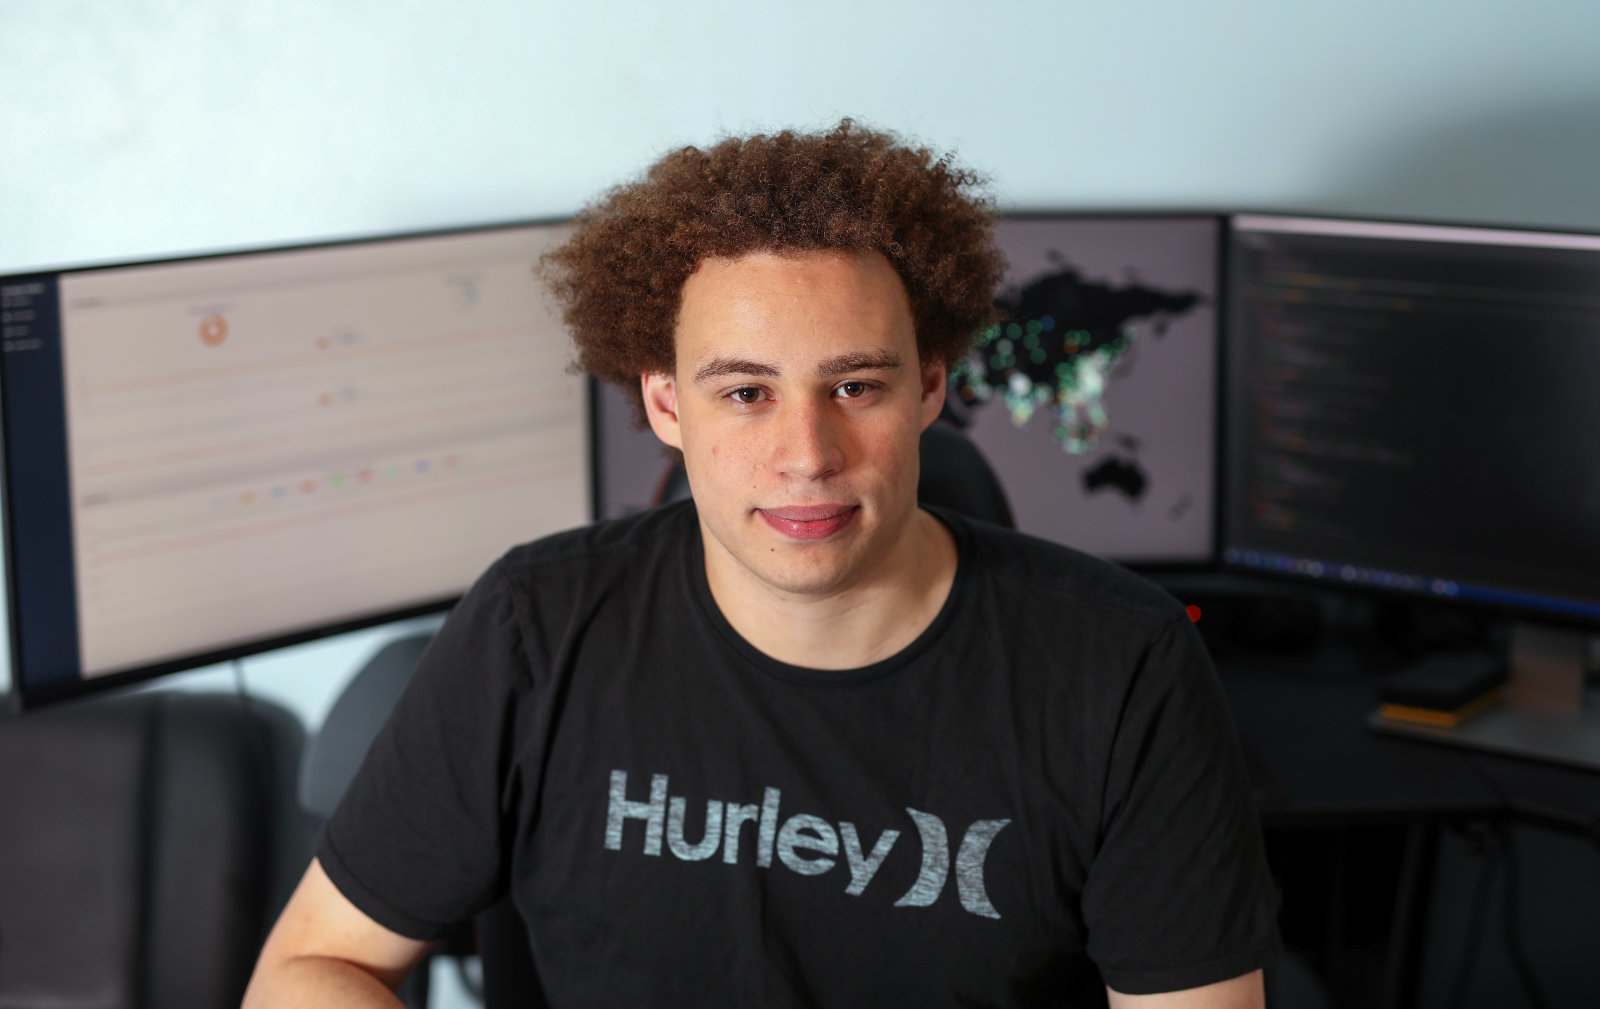 Marcus Hutchins, digital security researcher for Kryptos Logic, poses for a photograph in front of his computer in his bedroom in Ilfracombe, U.K., on Tuesday, July 4, 2017. Hutchins, the 23-year-old who saved the world from a devastating cyberattack in May was asleep in his bed in the English seaside town of Ilfracombe last week after a night of partying when another online extortion campaign spread across the globe. Photographer: Chris Ratcliffe/Bloomberg via Getty Images